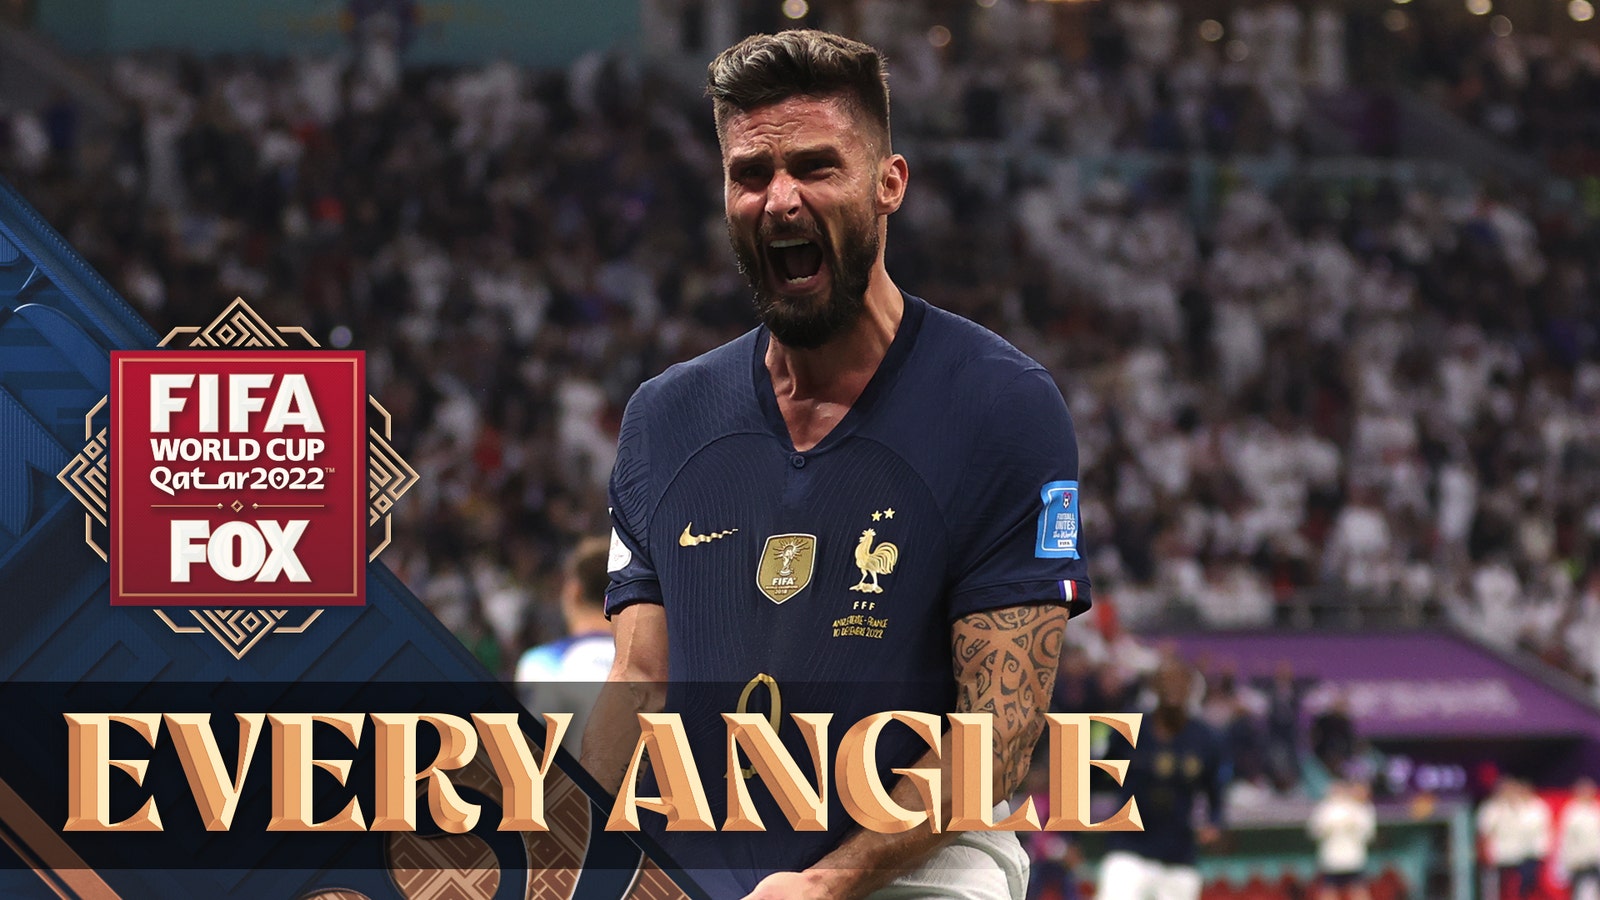 Olivier Giroud scored an INCREDIBLE game-winning header for France at the 2022 FIFA World Cup |  Every corner